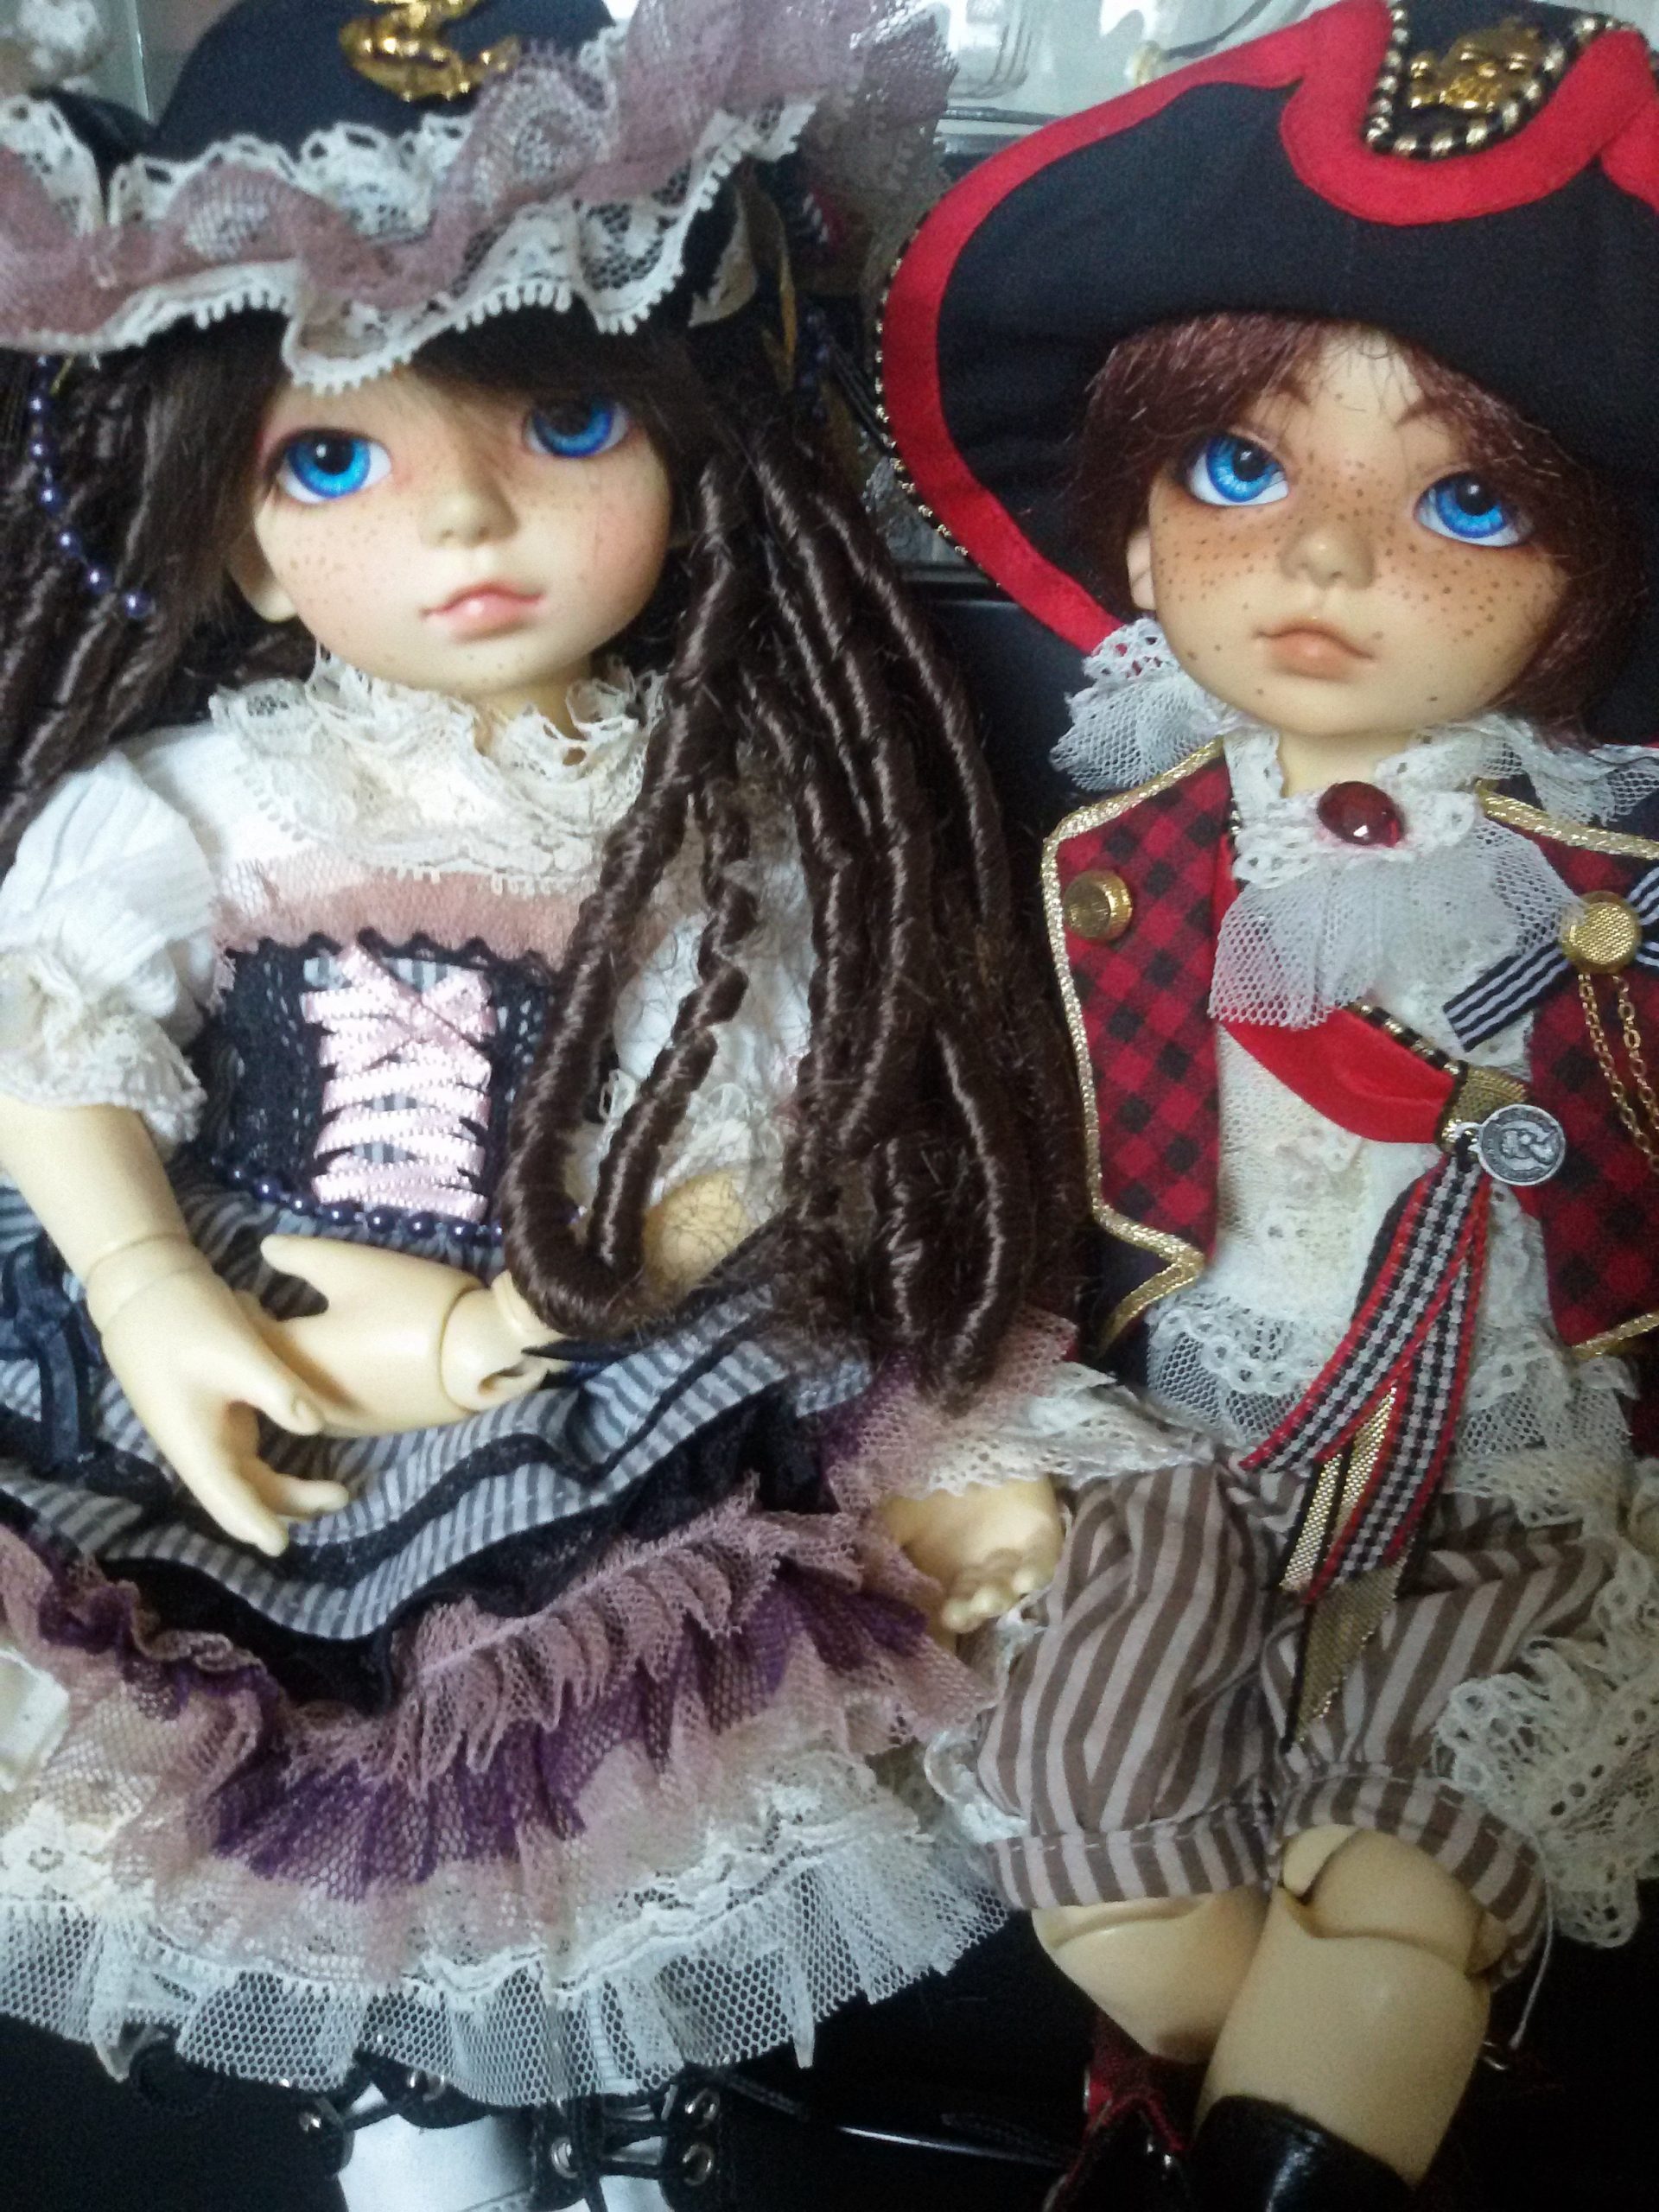 pirate ball jointed dolls